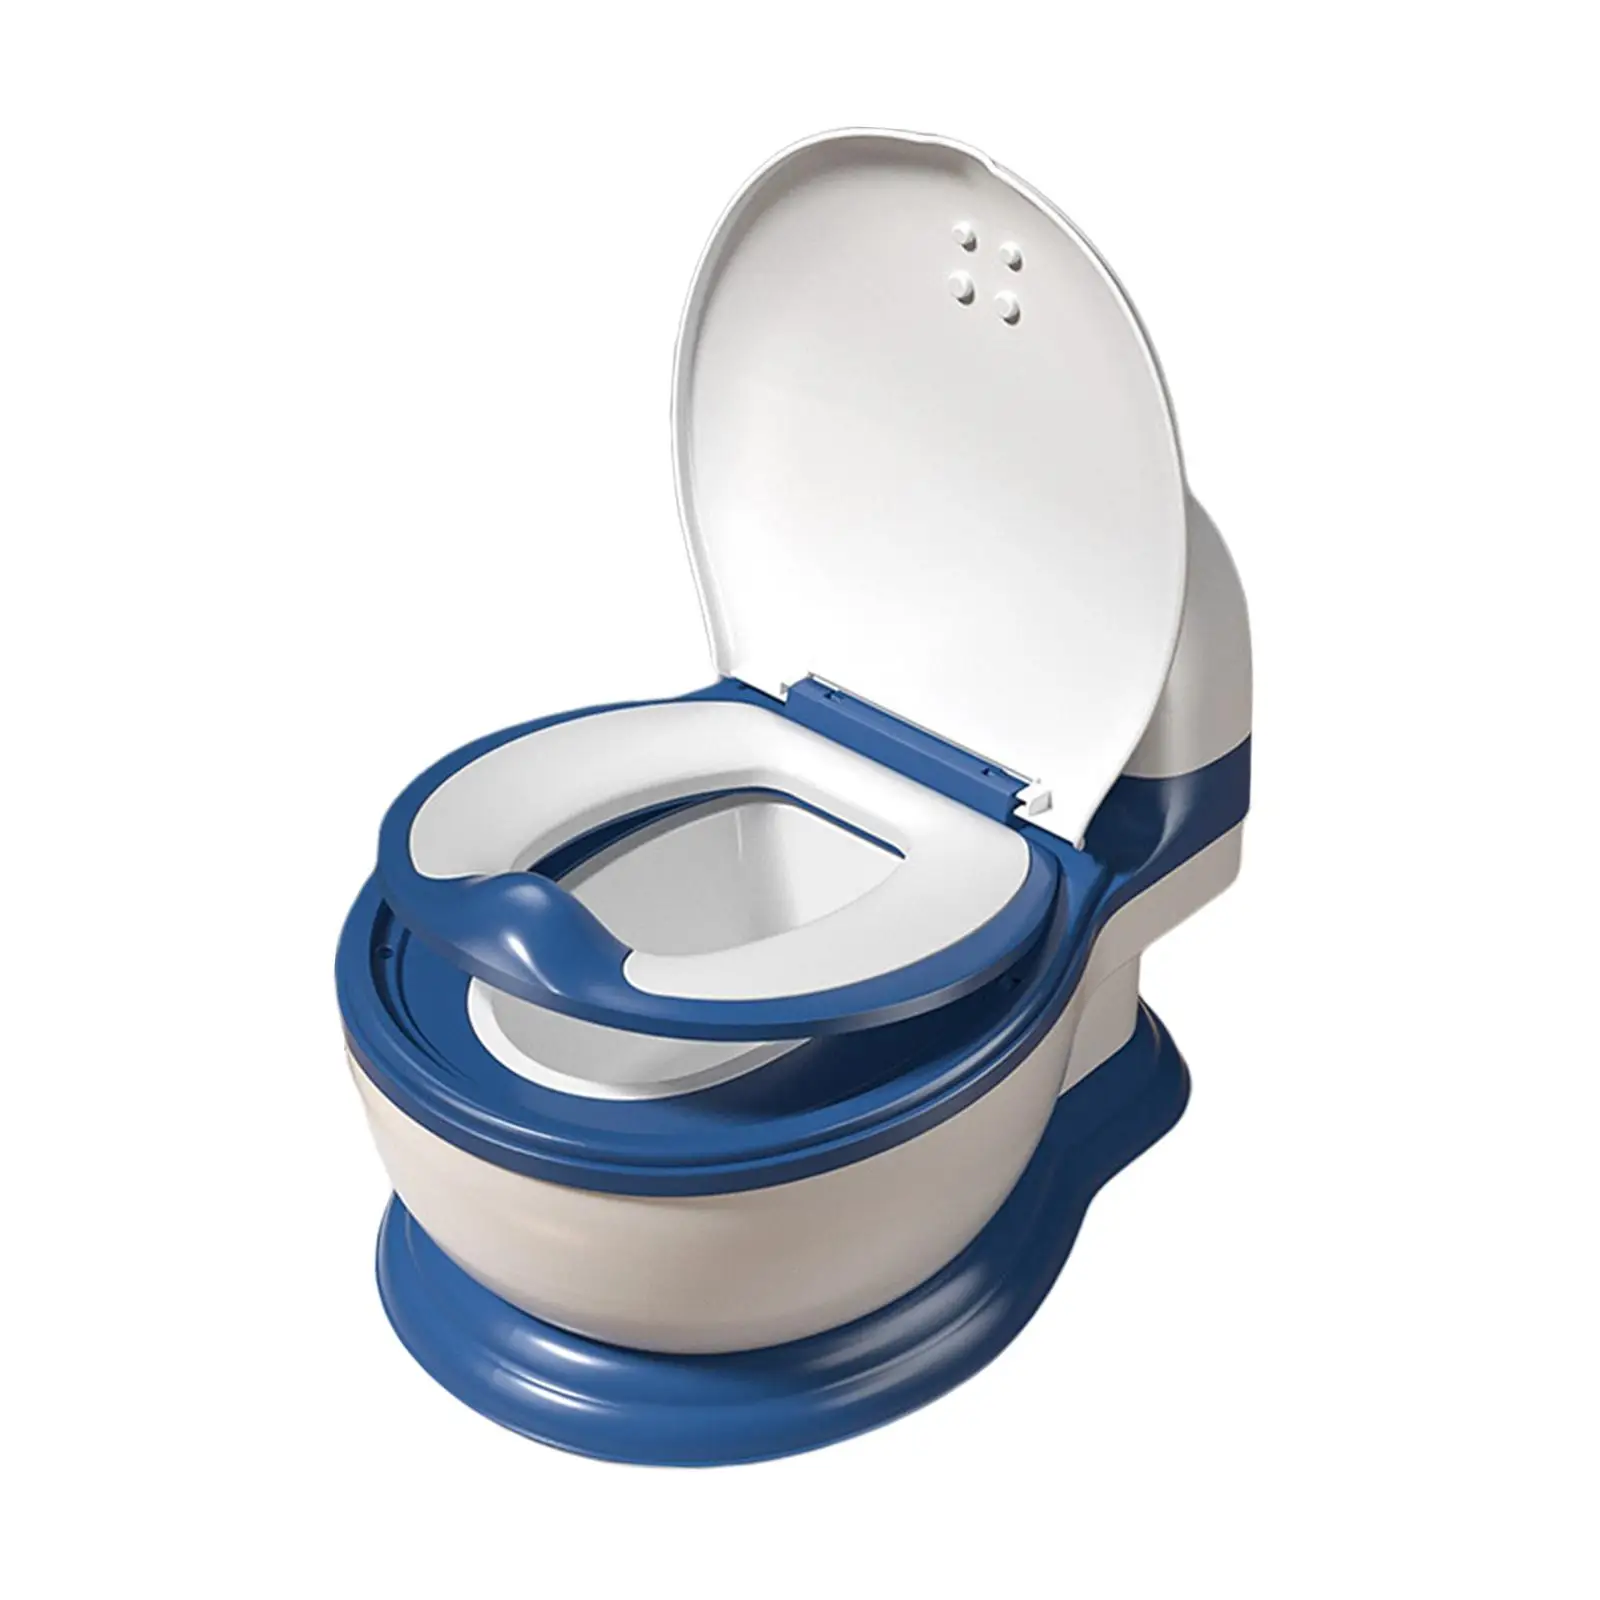 Real Feel Potty Realistic Removable Portable with Pad Potty Train Toilet Potty Seat for Bedroom Nursery Kindergarten Hotel Boys